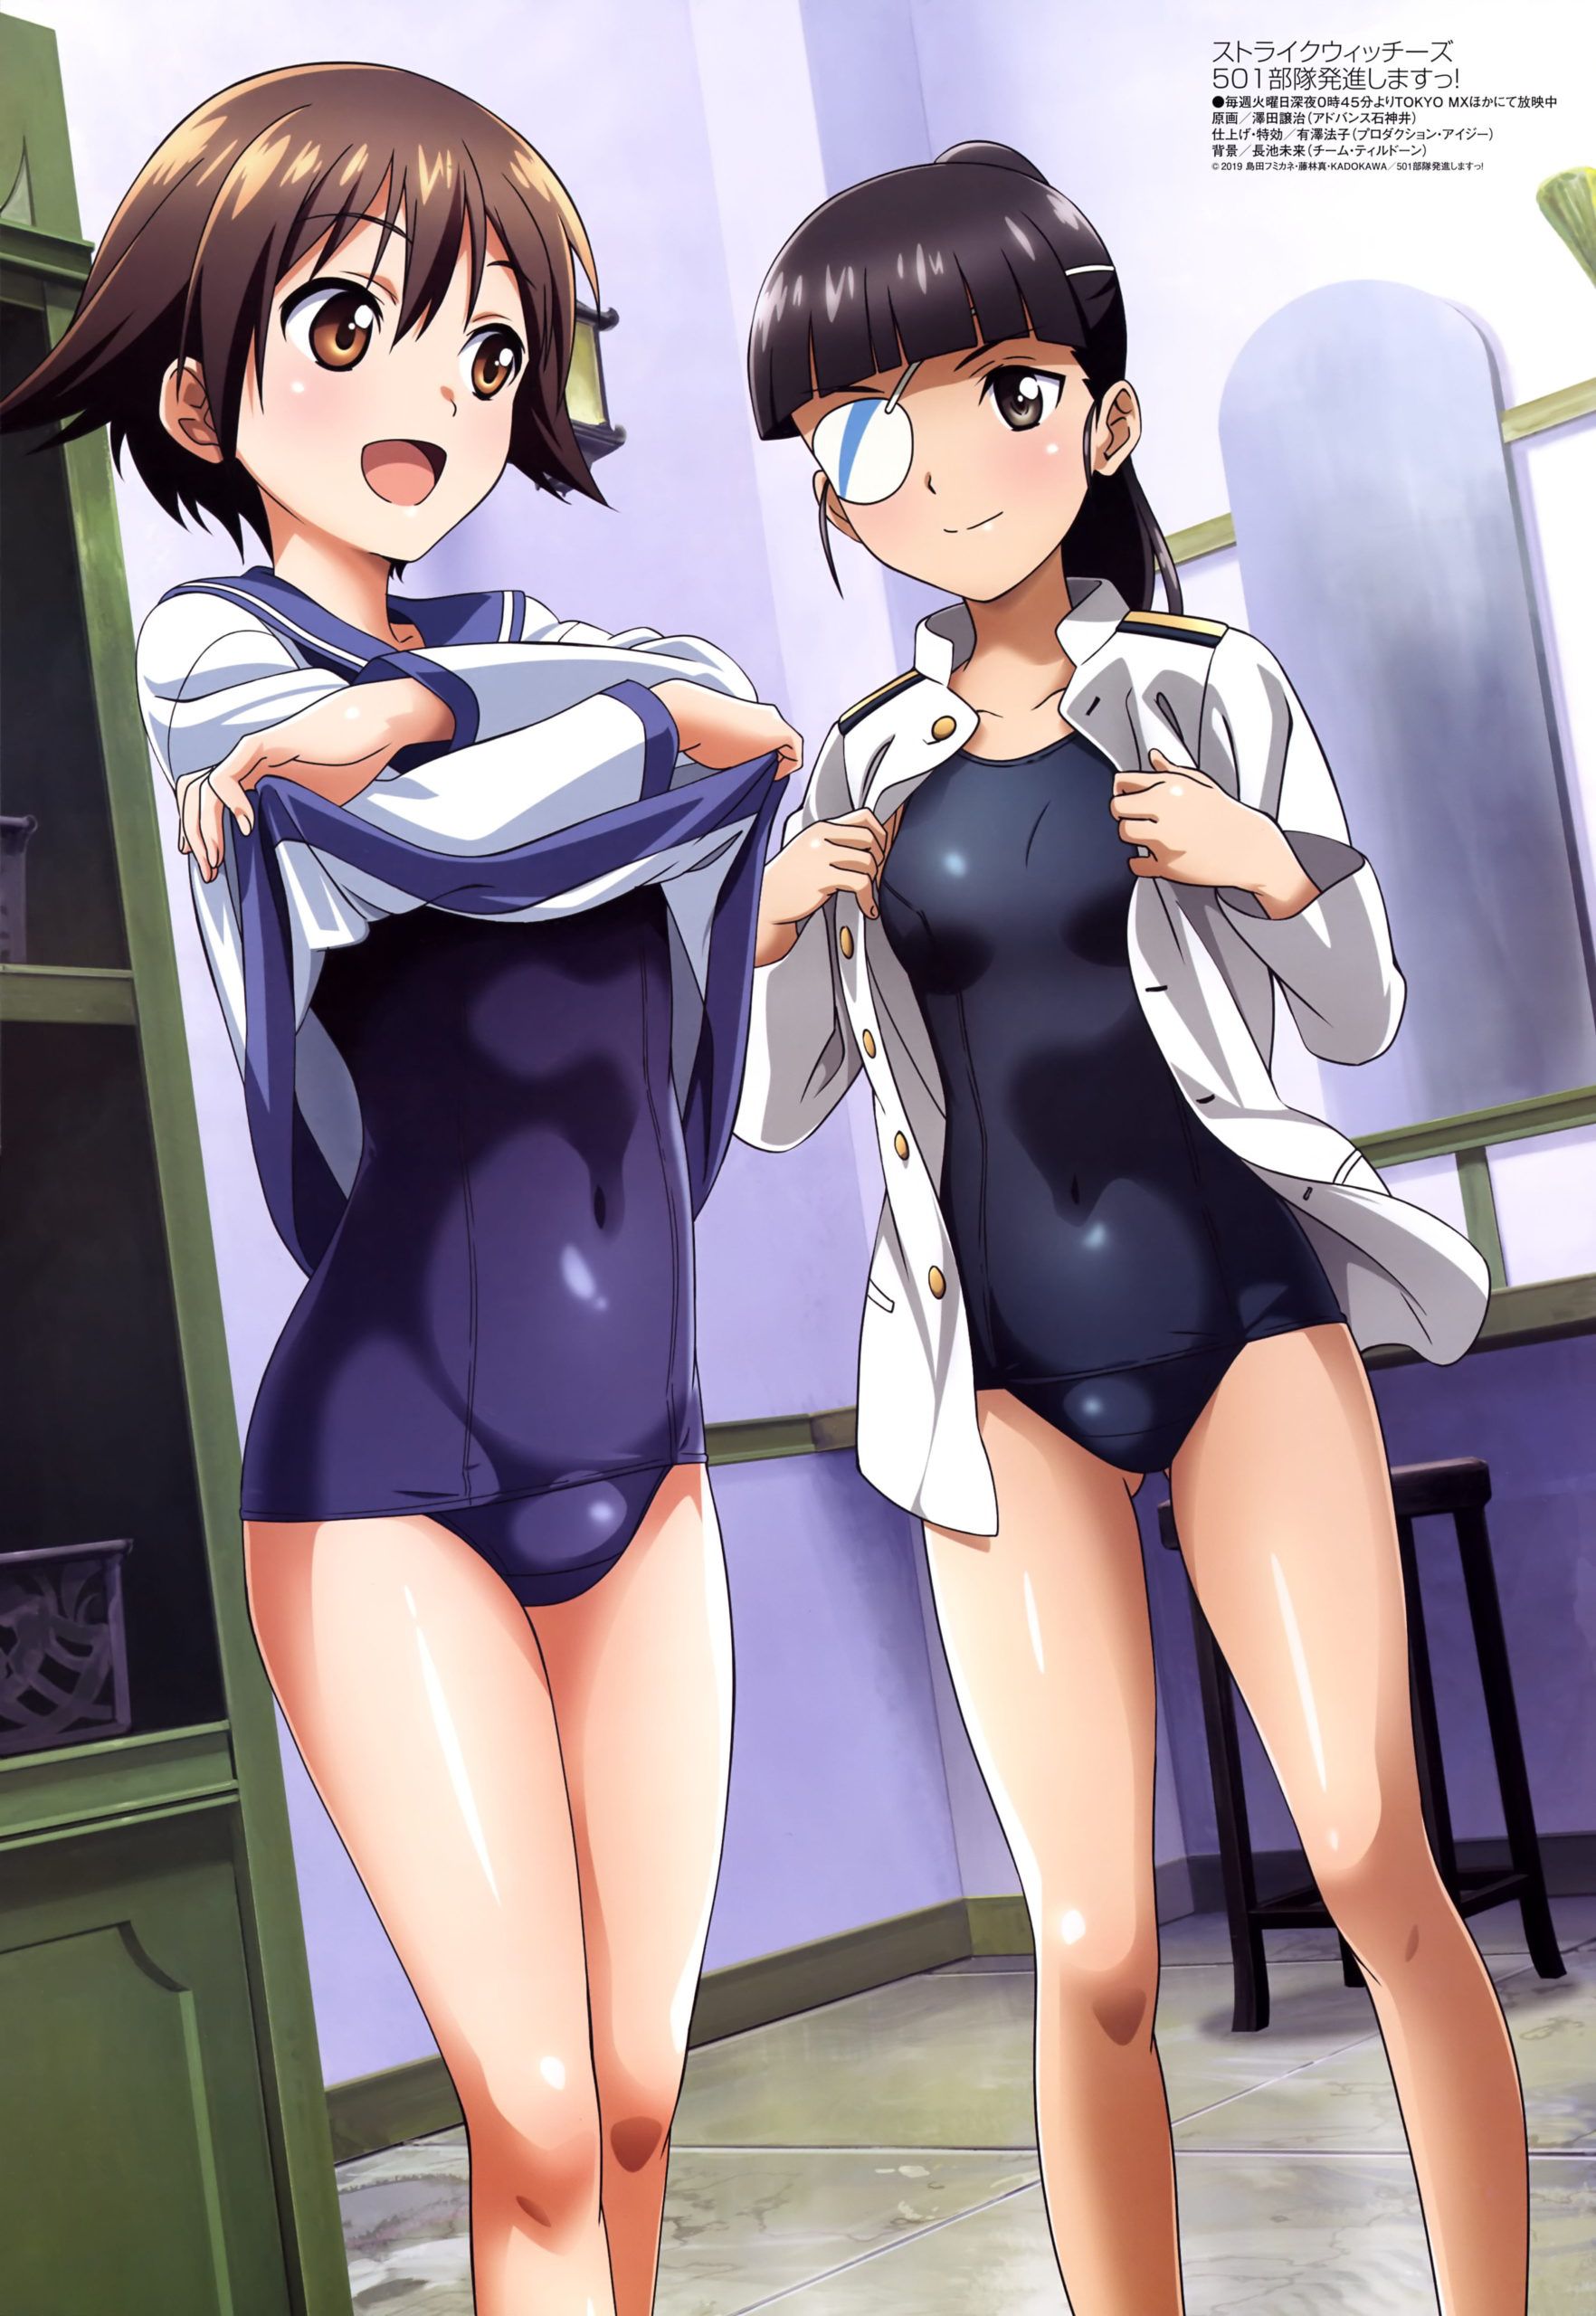 [Strike Witches] [Brave Witches] stripped Kora or erotic image Part 6 1